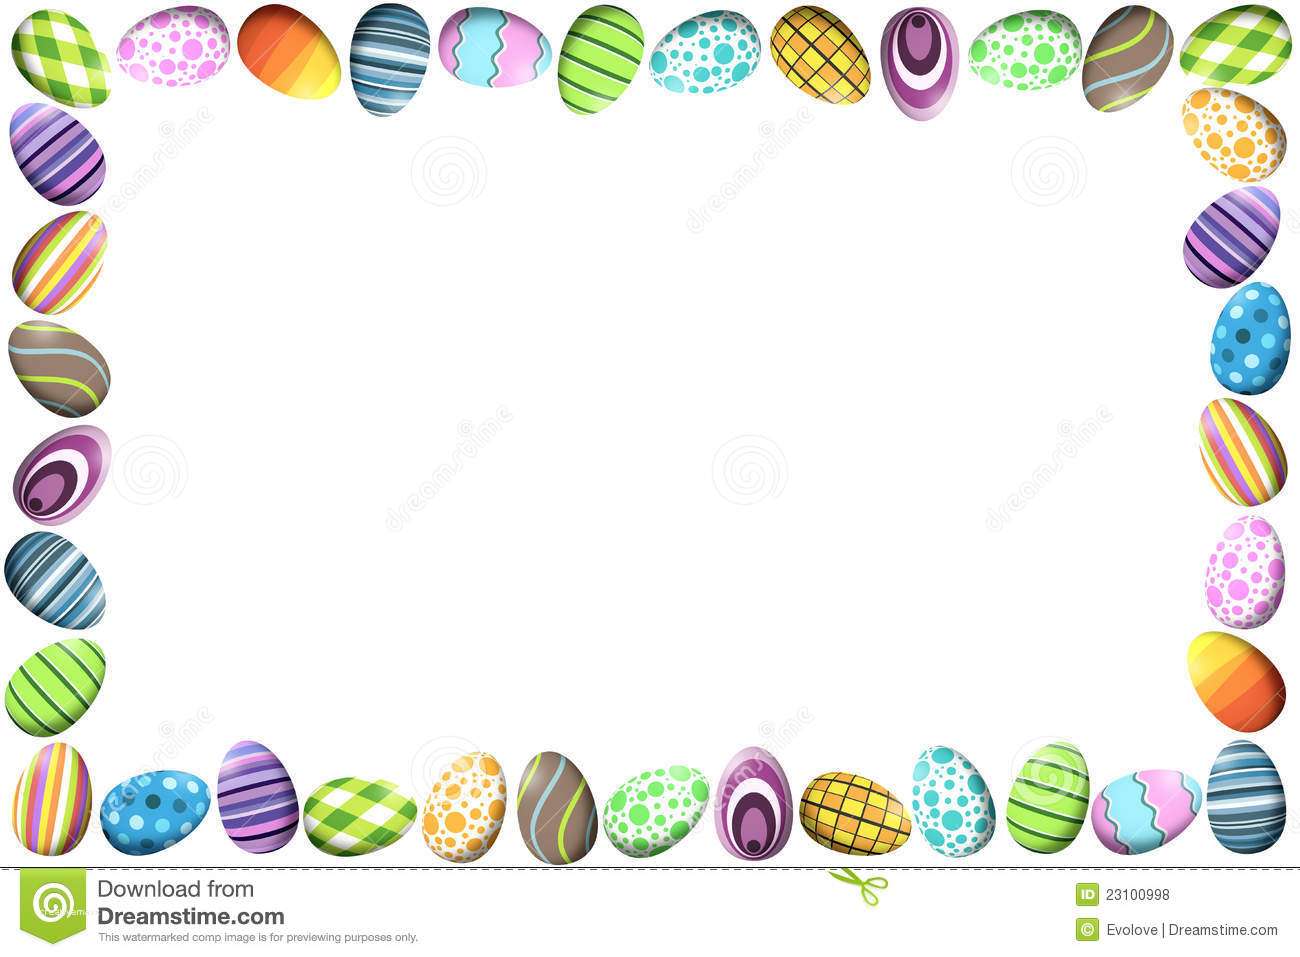 Boarder clipart easter egg. Eggs border new with